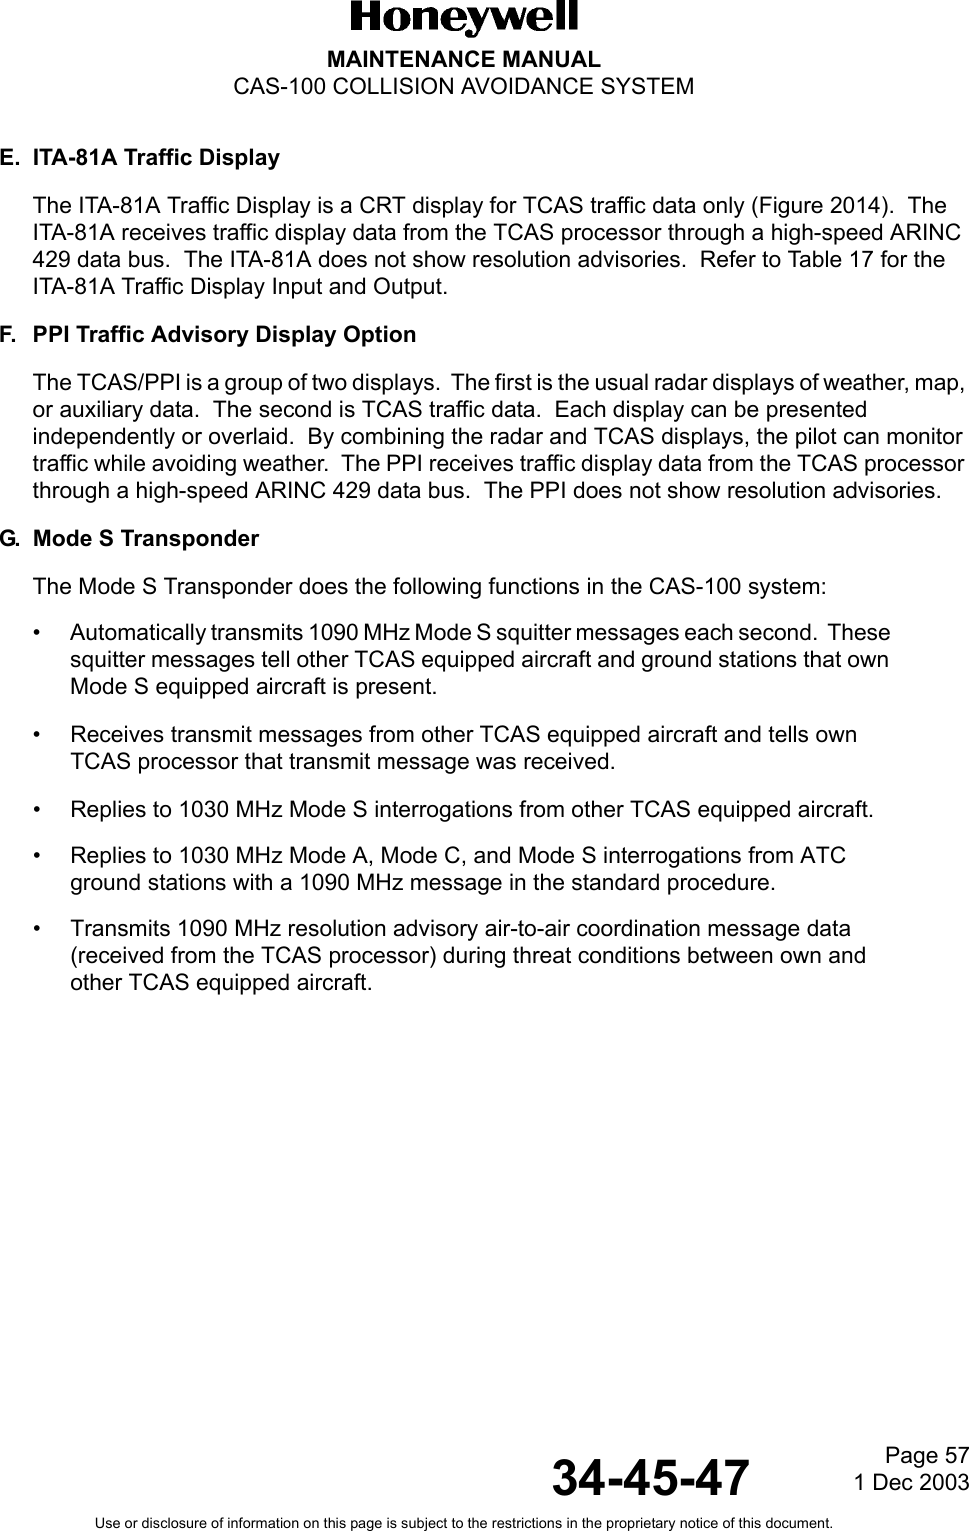 Page 571 Dec 200334-45-47MAINTENANCE MANUALCAS-100 COLLISION AVOIDANCE SYSTEMUse or disclosure of information on this page is subject to the restrictions in the proprietary notice of this document.E. ITA-81A Traffic DisplayThe ITA-81A Traffic Display is a CRT display for TCAS traffic data only (Figure 2014).  The ITA-81A receives traffic display data from the TCAS processor through a high-speed ARINC 429 data bus.  The ITA-81A does not show resolution advisories.  Refer to Table 17 for the ITA-81A Traffic Display Input and Output.F. PPI Traffic Advisory Display OptionThe TCAS/PPI is a group of two displays.  The first is the usual radar displays of weather, map, or auxiliary data.  The second is TCAS traffic data.  Each display can be presented independently or overlaid.  By combining the radar and TCAS displays, the pilot can monitor traffic while avoiding weather.  The PPI receives traffic display data from the TCAS processor through a high-speed ARINC 429 data bus.  The PPI does not show resolution advisories. G. Mode S TransponderThe Mode S Transponder does the following functions in the CAS-100 system:• Automatically transmits 1090 MHz Mode S squitter messages each second.  These squitter messages tell other TCAS equipped aircraft and ground stations that own Mode S equipped aircraft is present.• Receives transmit messages from other TCAS equipped aircraft and tells own TCAS processor that transmit message was received.• Replies to 1030 MHz Mode S interrogations from other TCAS equipped aircraft.• Replies to 1030 MHz Mode A, Mode C, and Mode S interrogations from ATC ground stations with a 1090 MHz message in the standard procedure.• Transmits 1090 MHz resolution advisory air-to-air coordination message data (received from the TCAS processor) during threat conditions between own and other TCAS equipped aircraft.